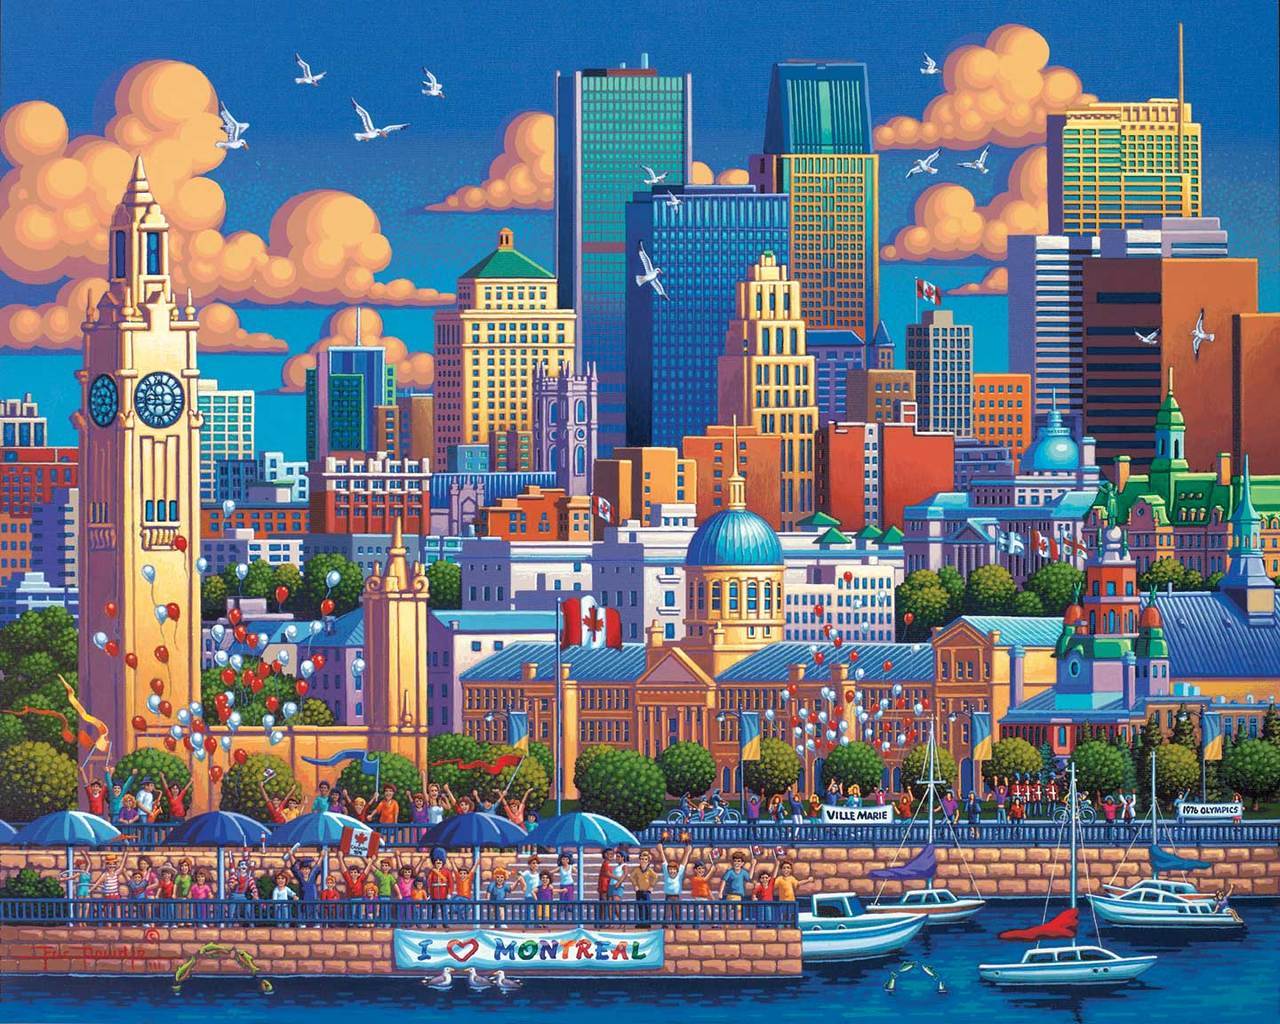 Montreal - 1000pc Jigsaw Puzzle by Dowdle  			  					NEW